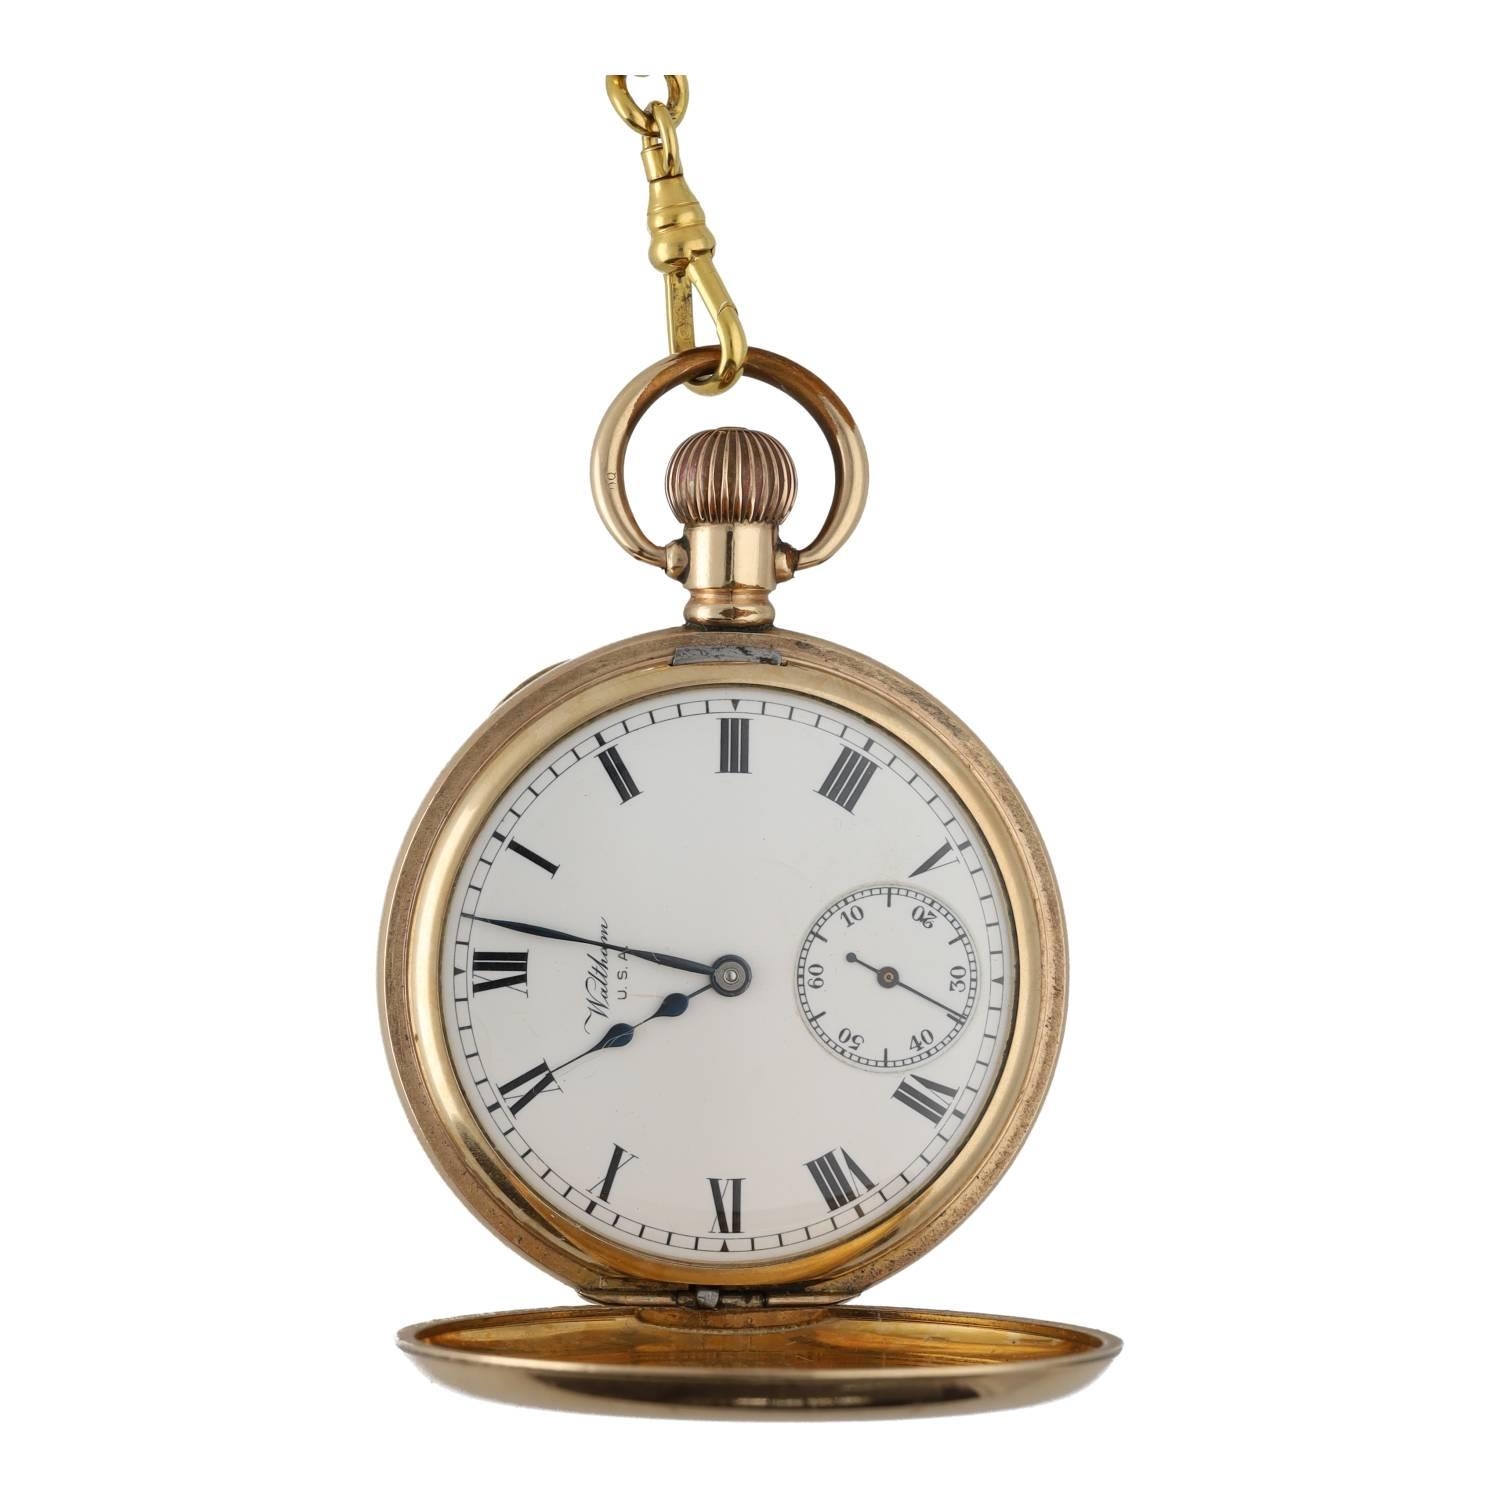 American Waltham gold plated half hunter lever pocket watch, circa 1908, serial no. 1749278, - Image 2 of 5